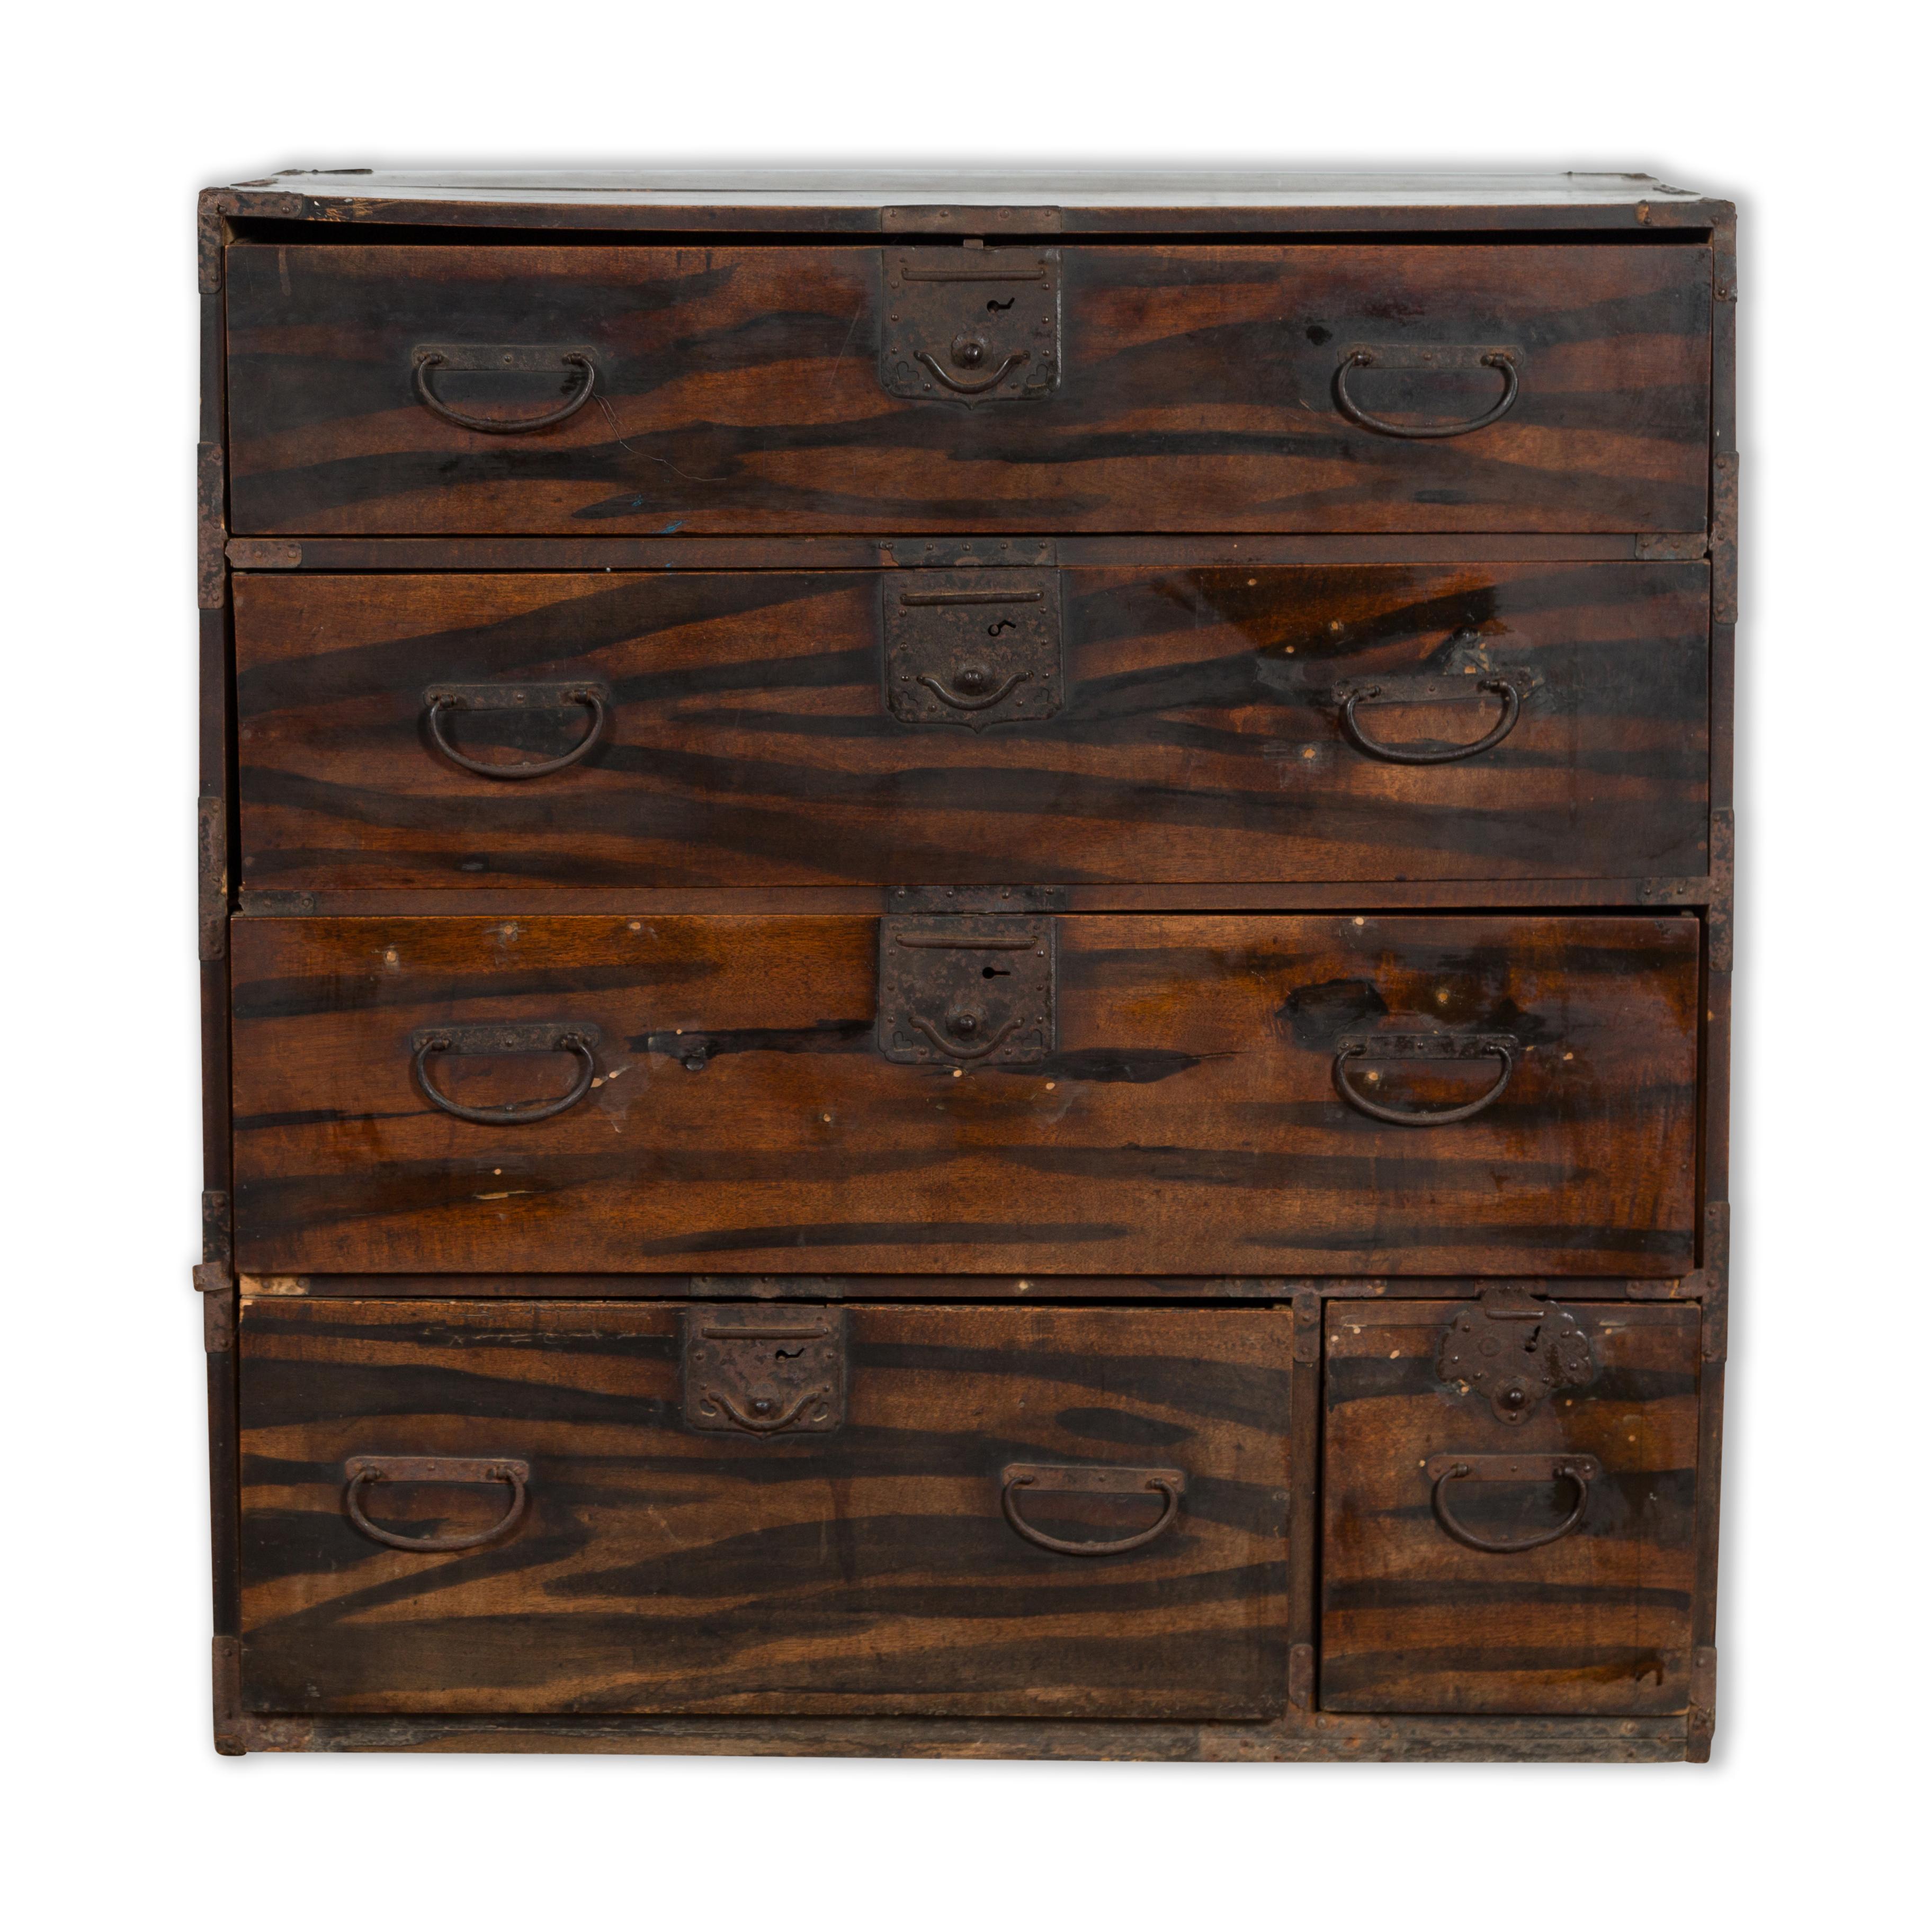 Japanese Meiji Zebra Wood Tansu Chest in Isho-Dansu Style with Five Drawers For Sale 4